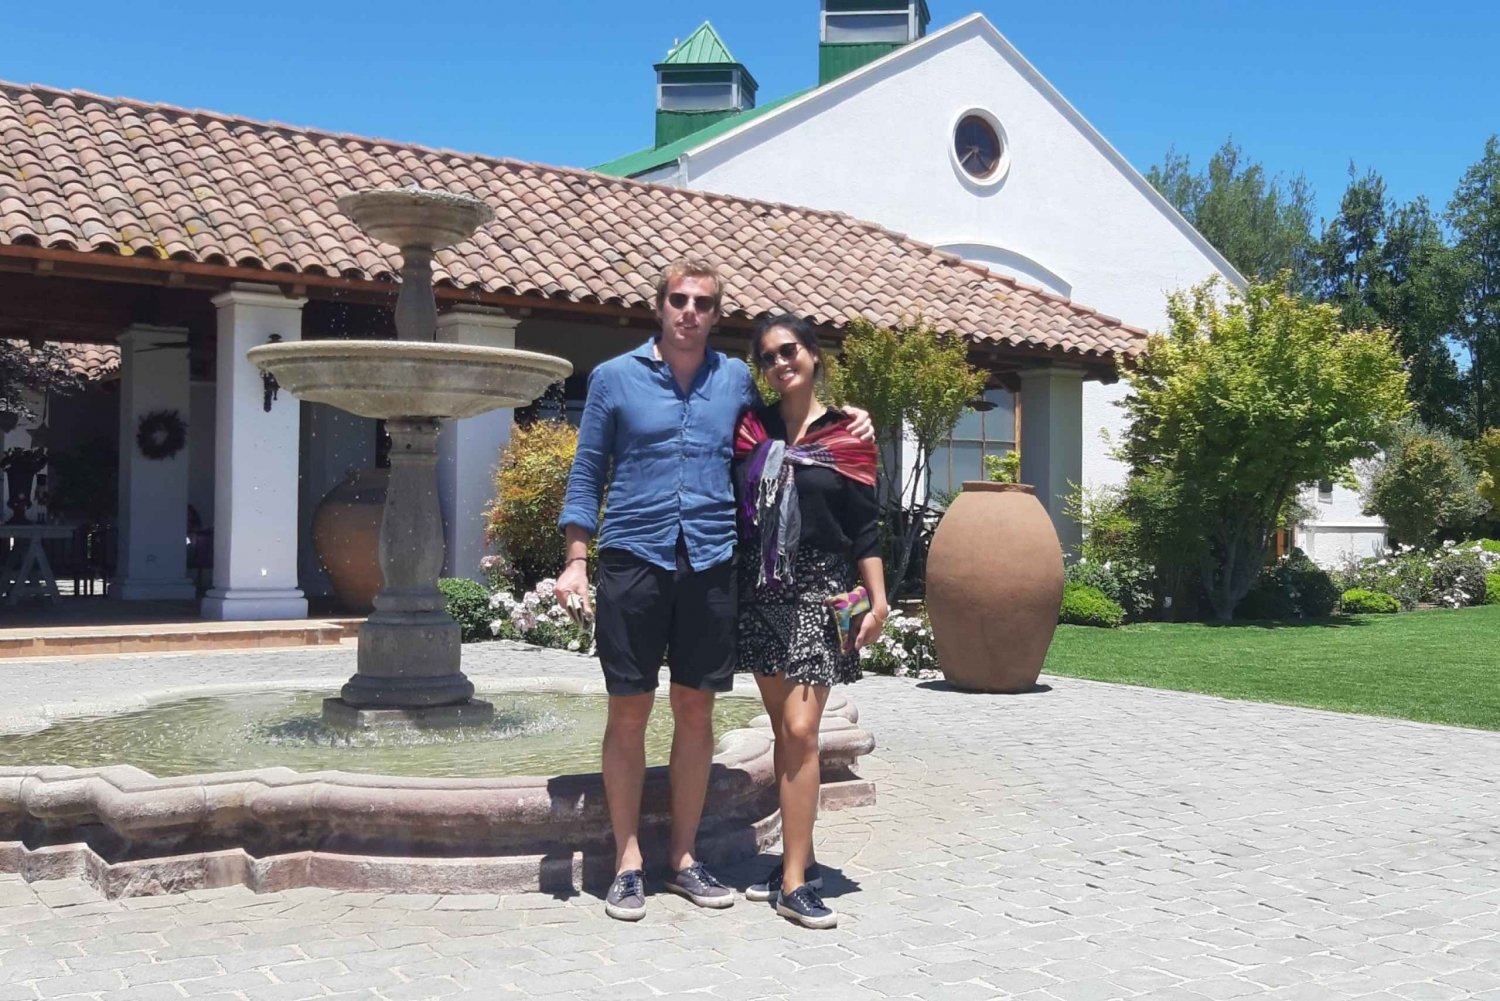 Private Full-Day Wine Tasting Tour in Colchagua Valley